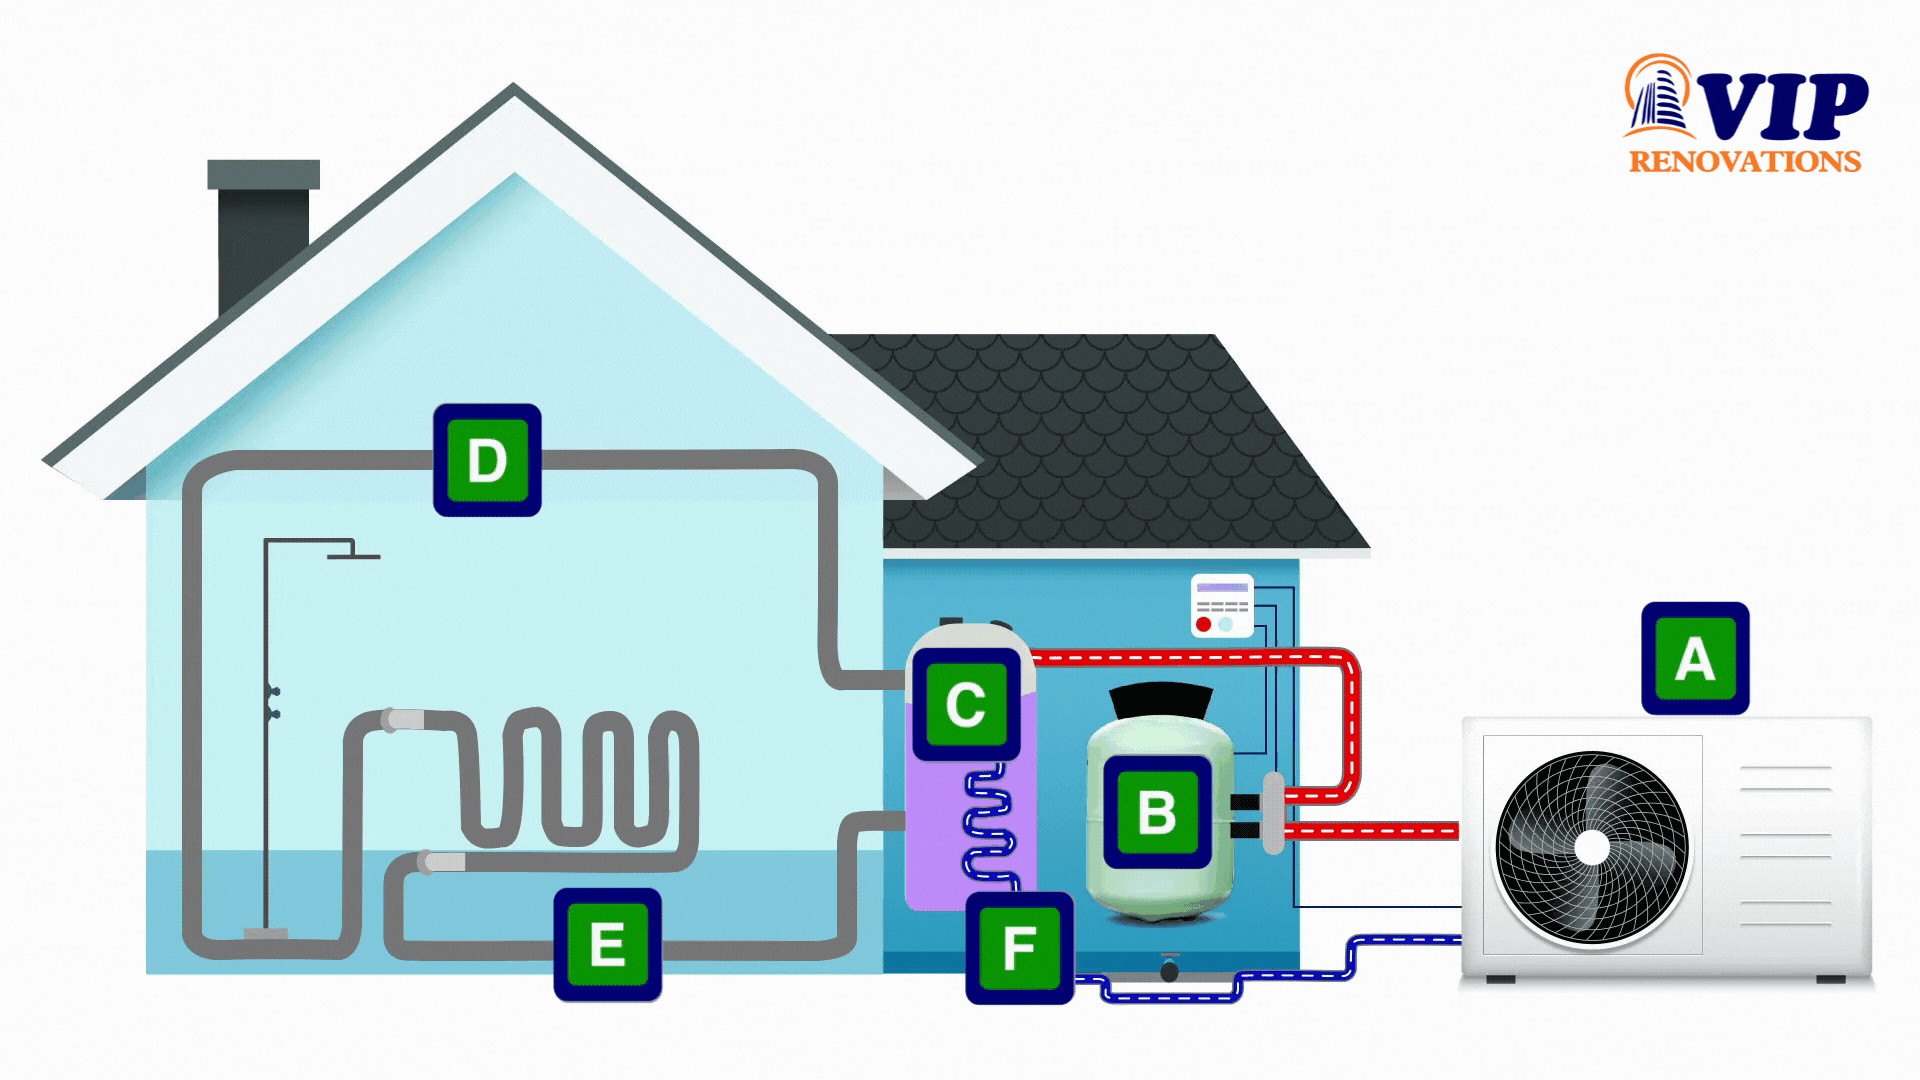 Heat pumps - air to water